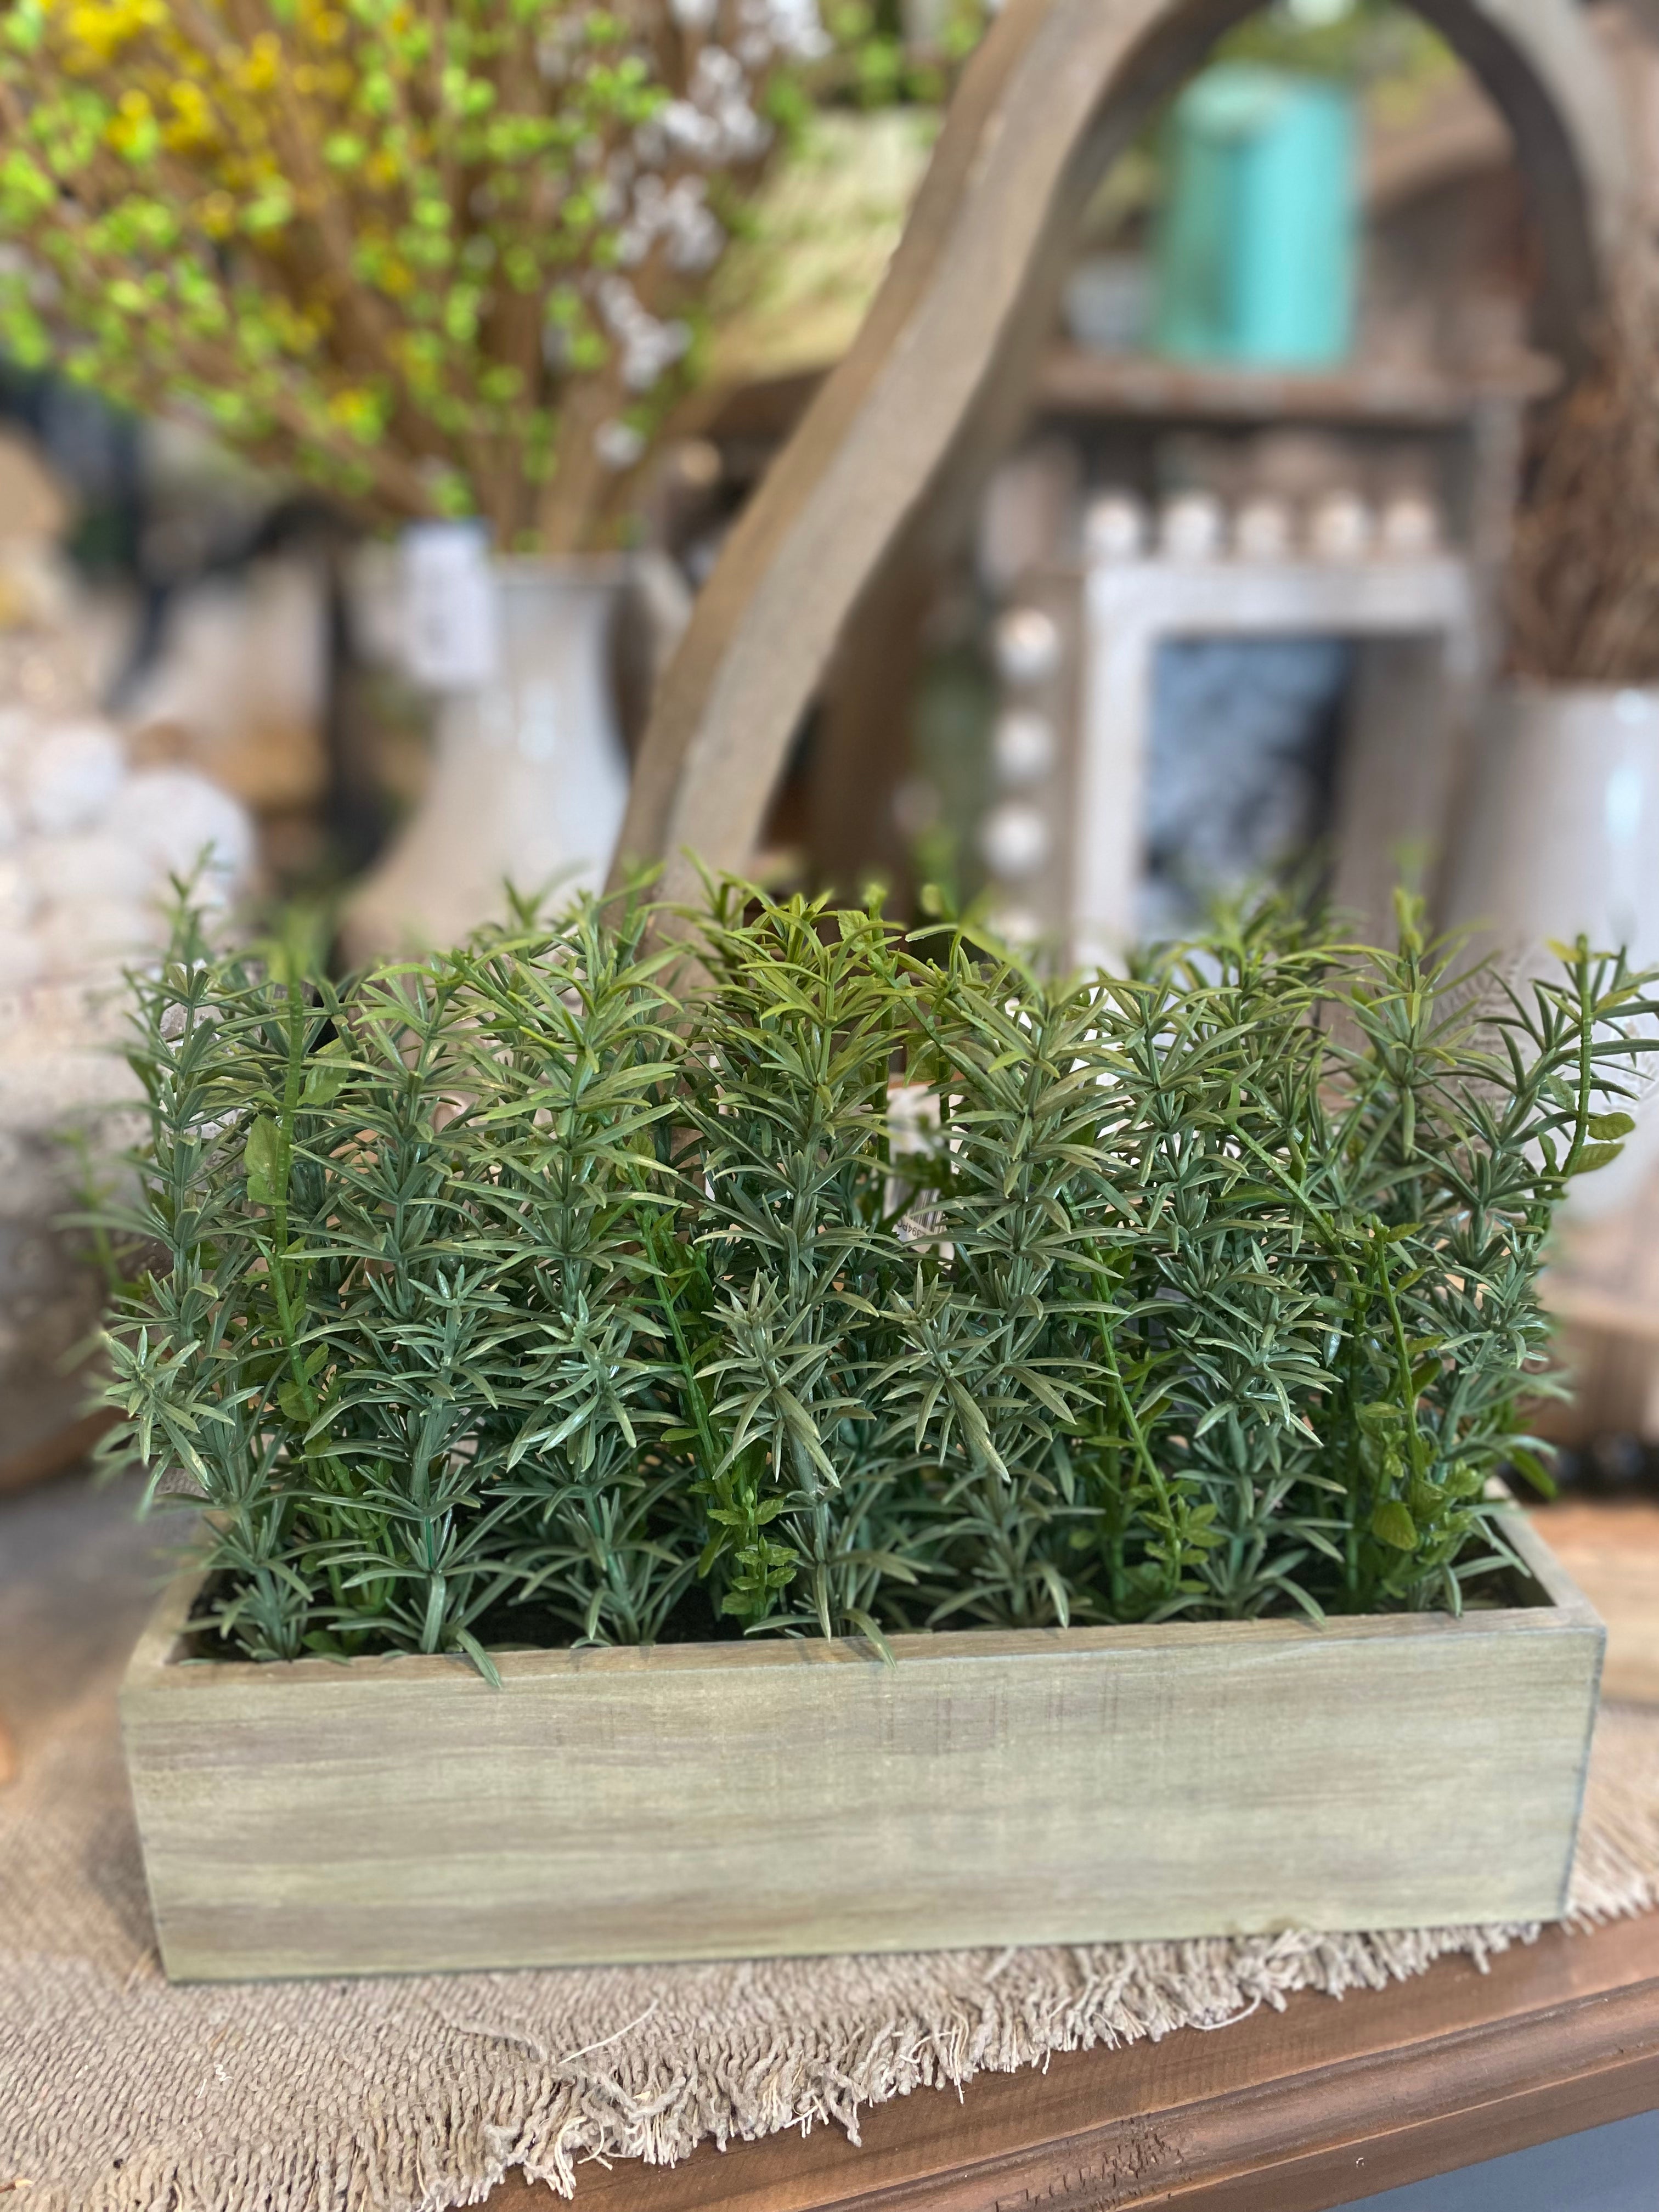 Planted Herb in Wooden box